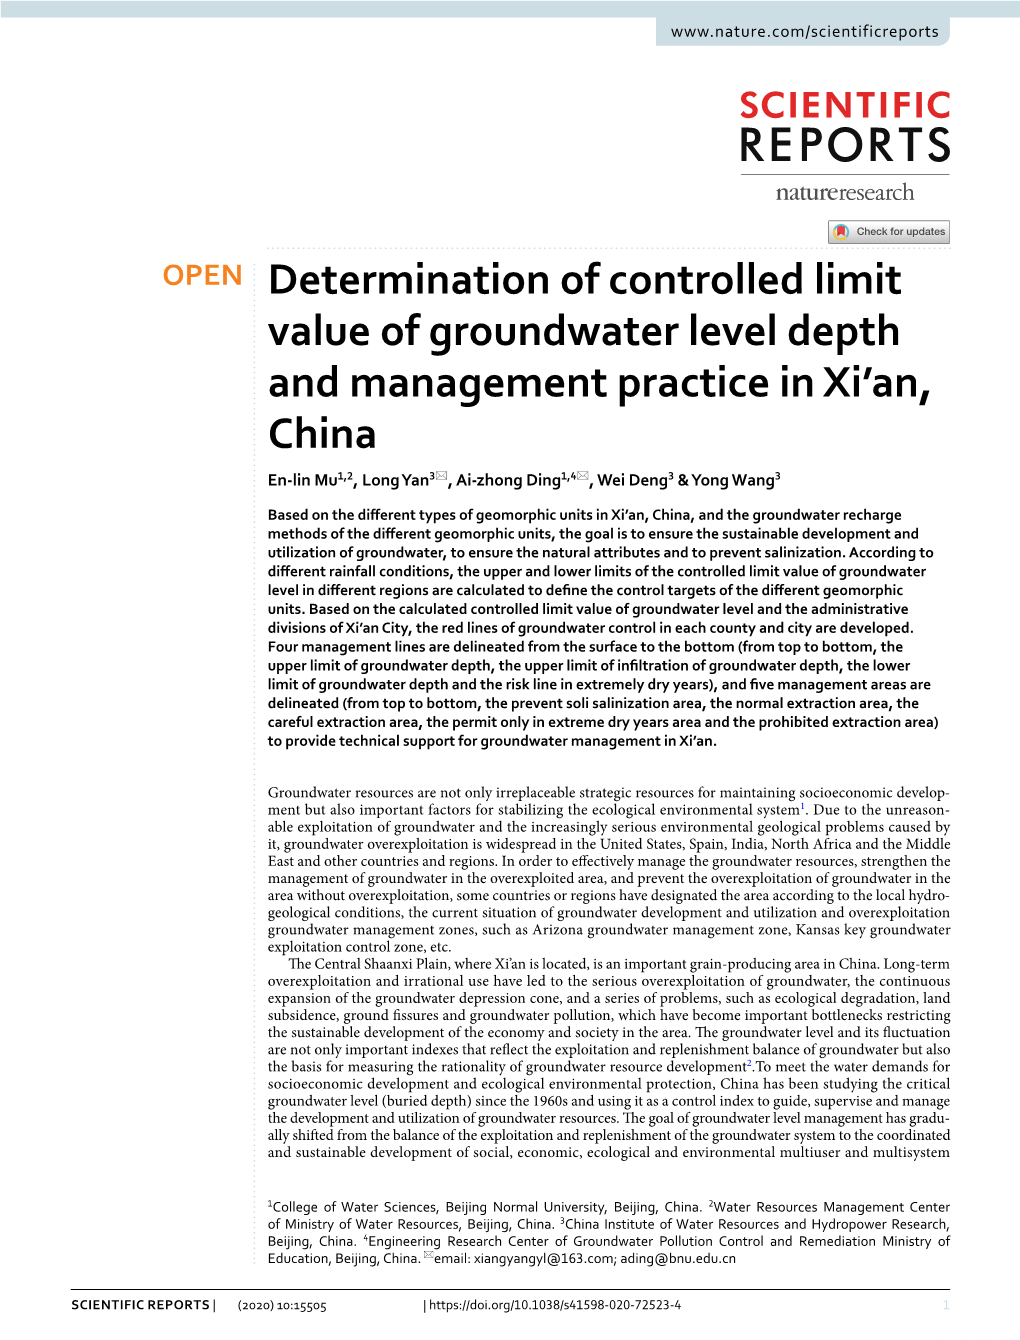 Determination of Controlled Limit Value of Groundwater Level Depth